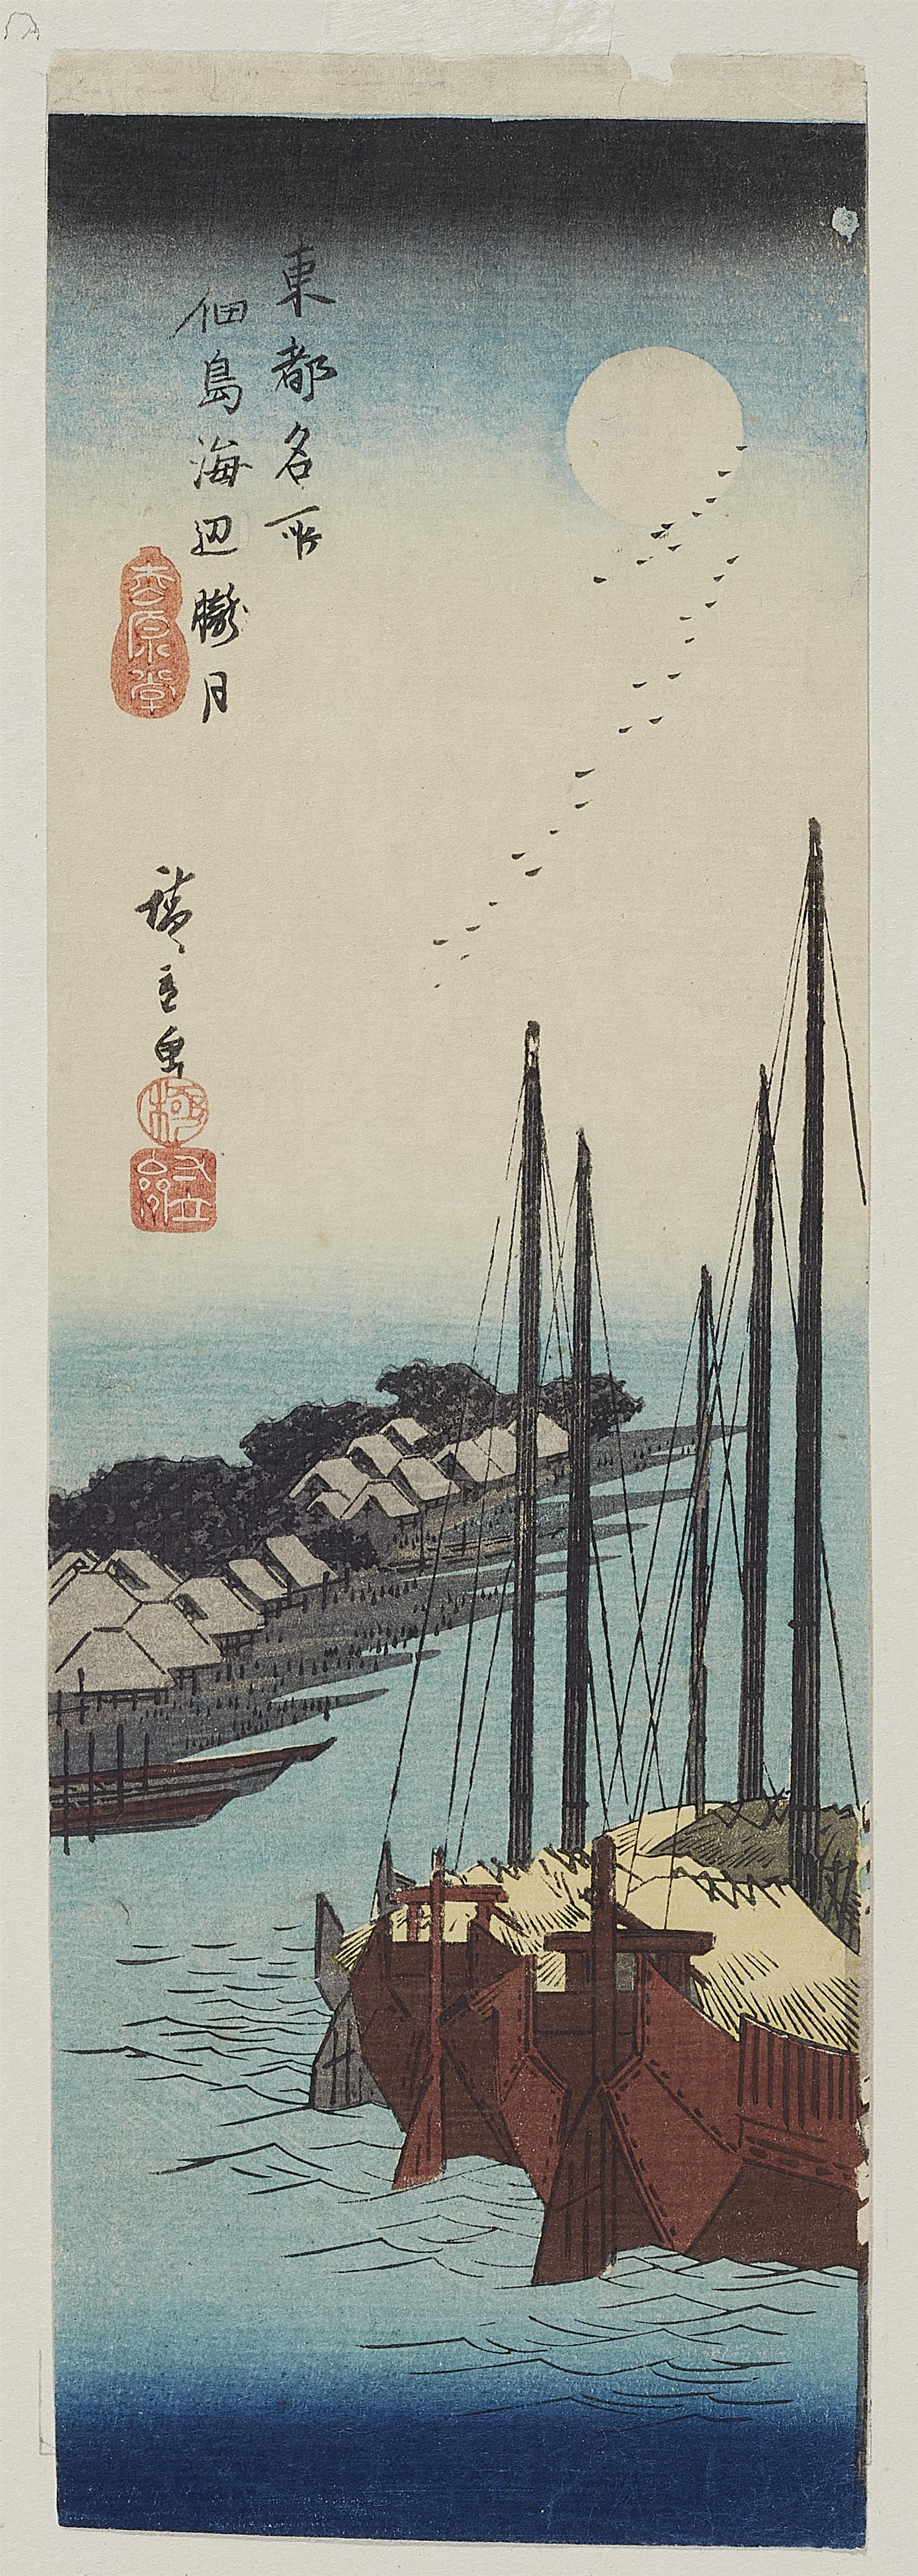 Utagawa Hiroshige - Full moon and wild geese over the island and its boats - image-1